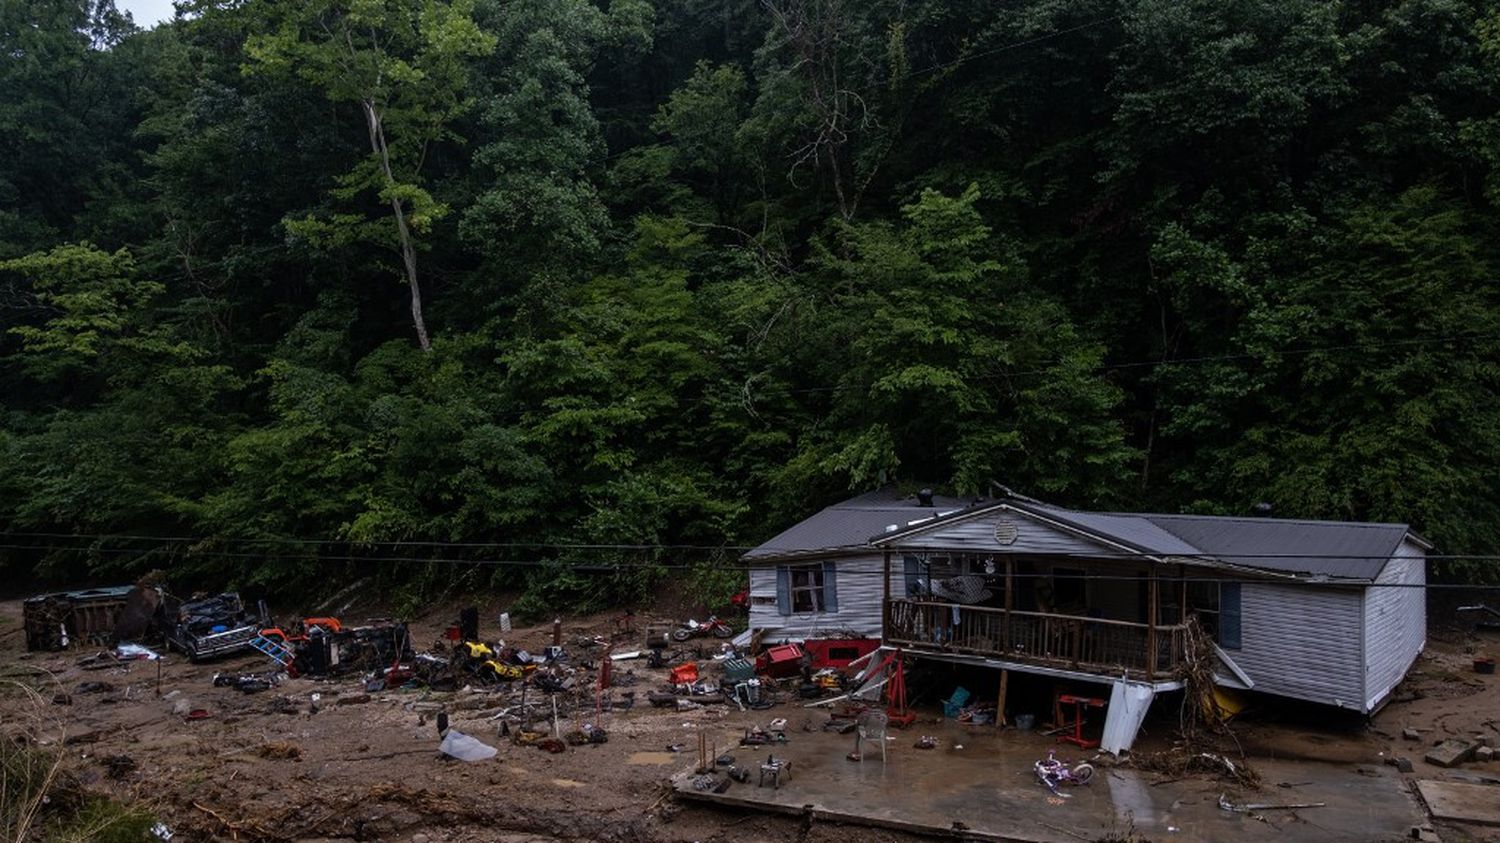 United States: Kentucky flood death toll rises to 37
